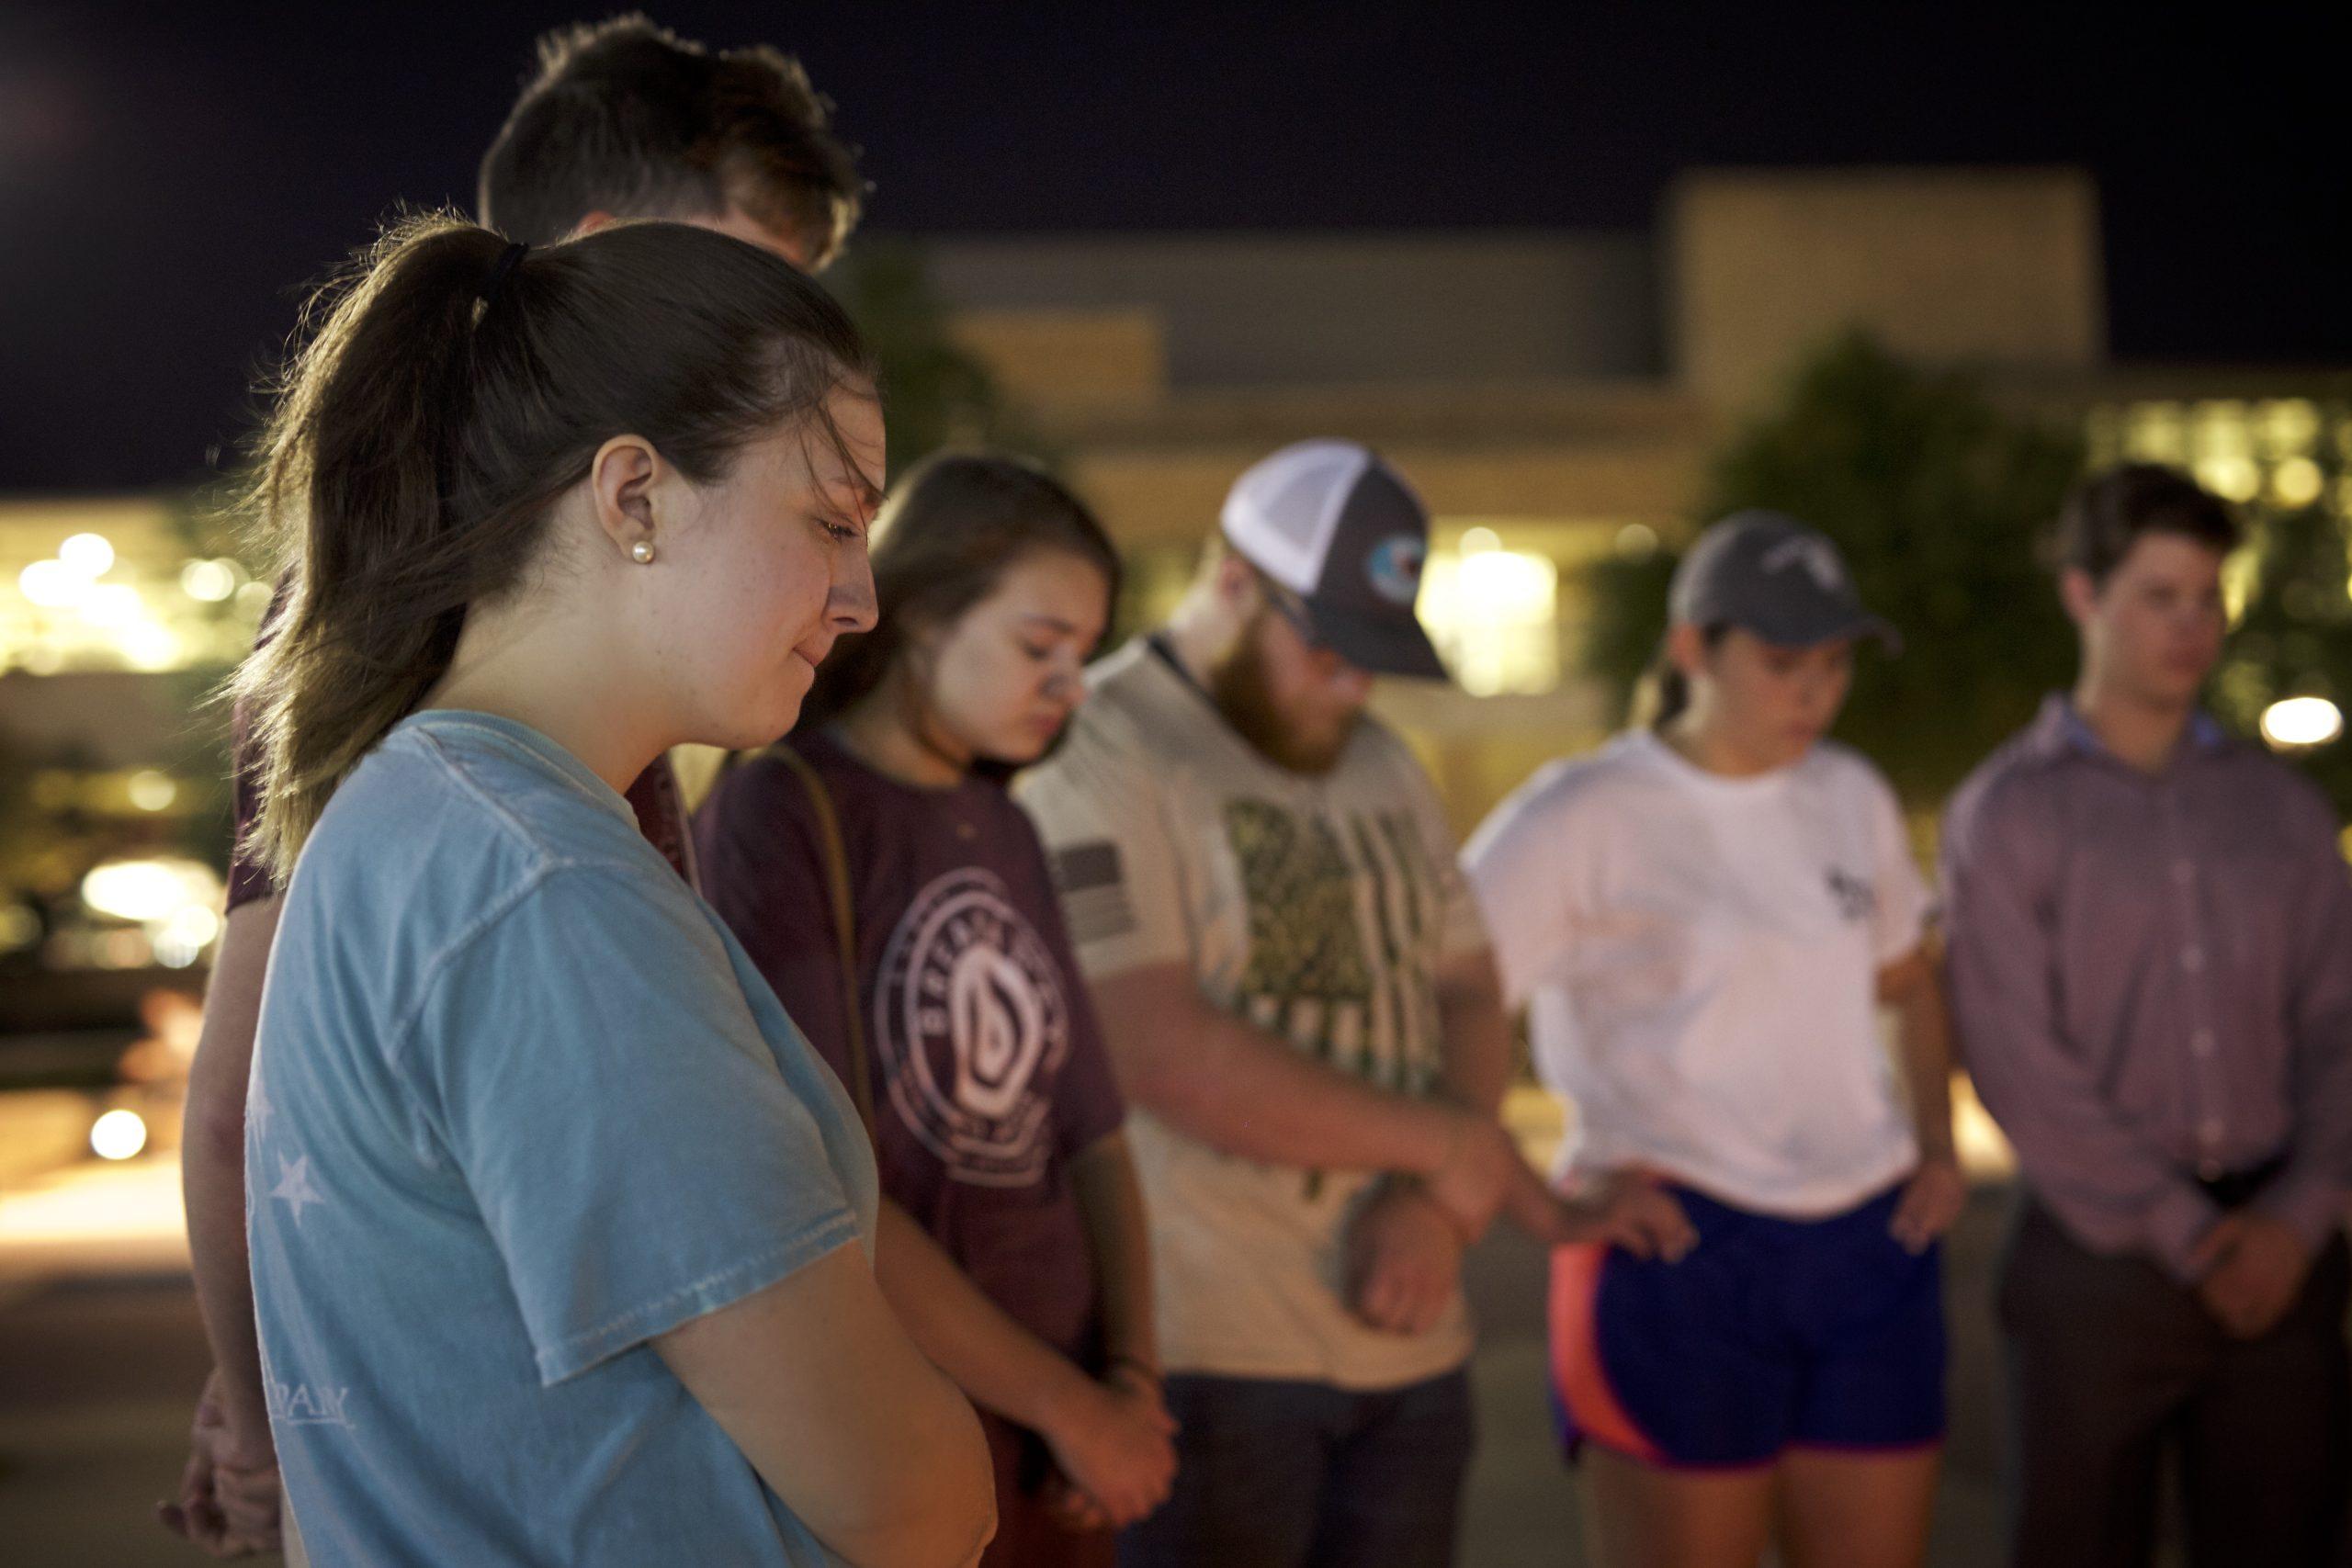 Students+hold+candlelight+vigil+for+Las+Vegas+victims